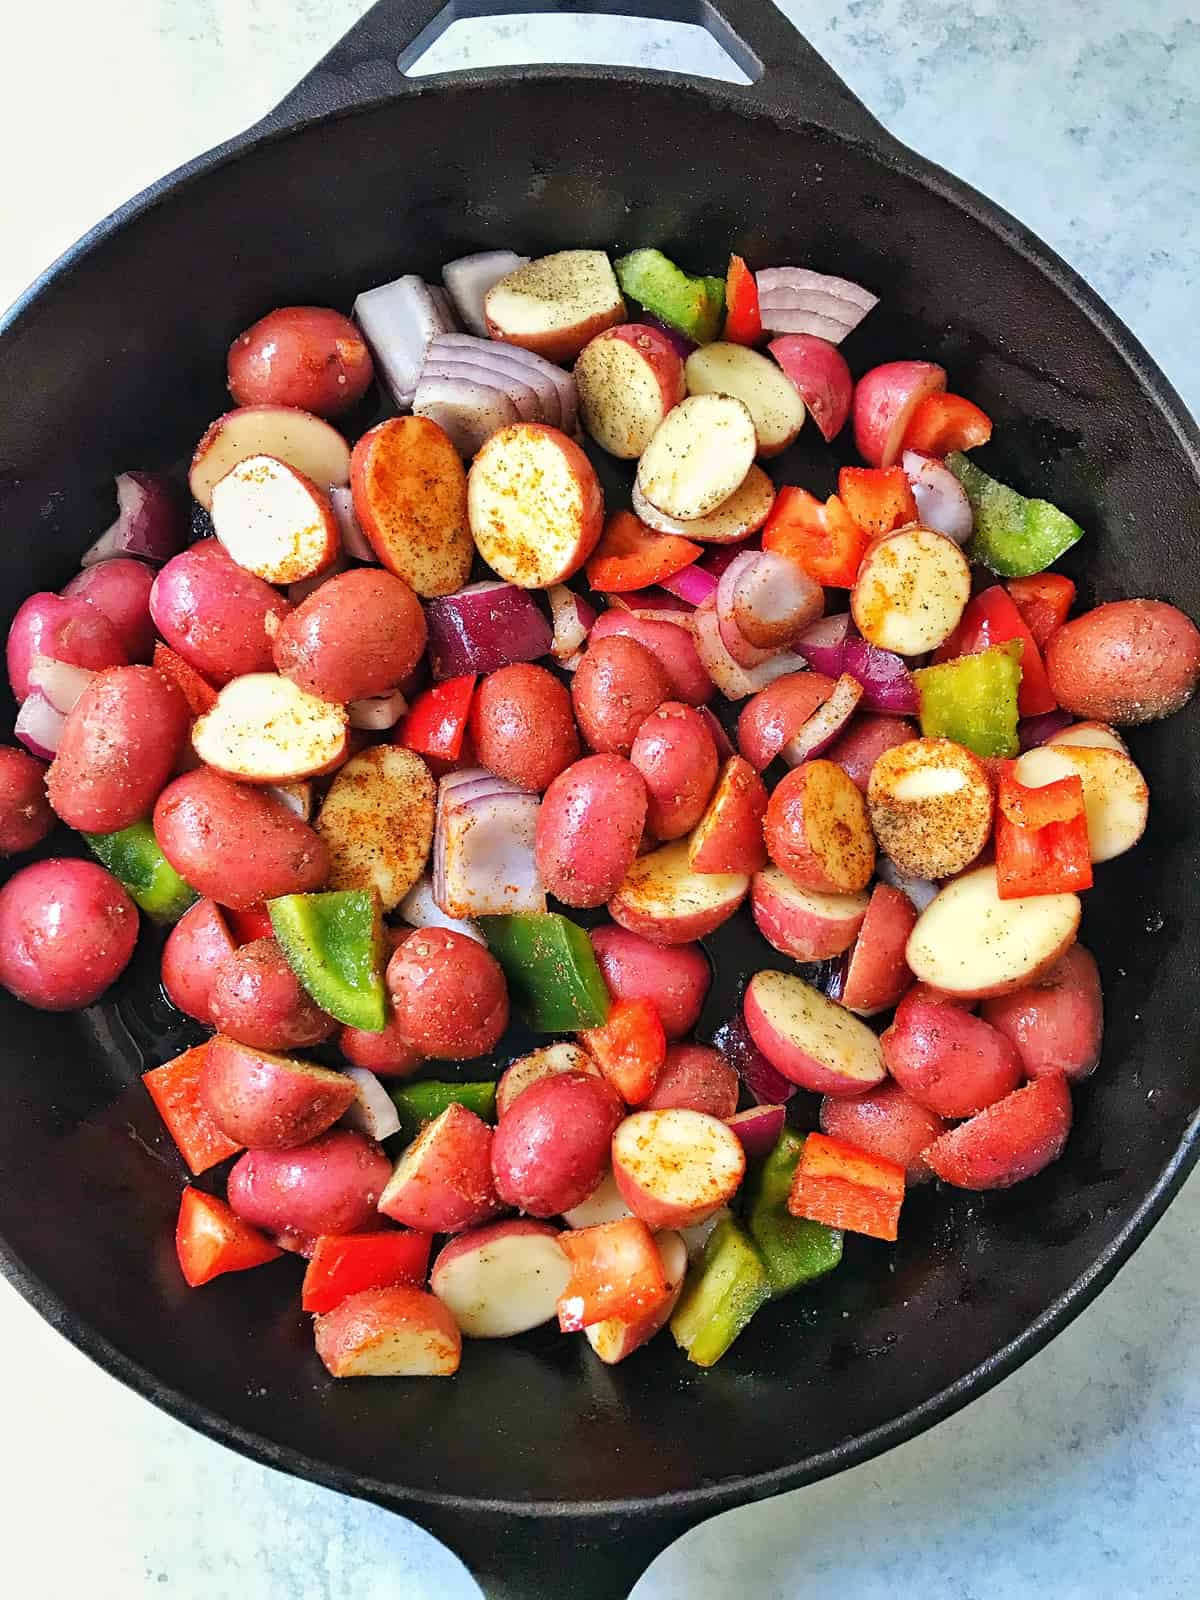 Potatoes, onions and peppers in skillet